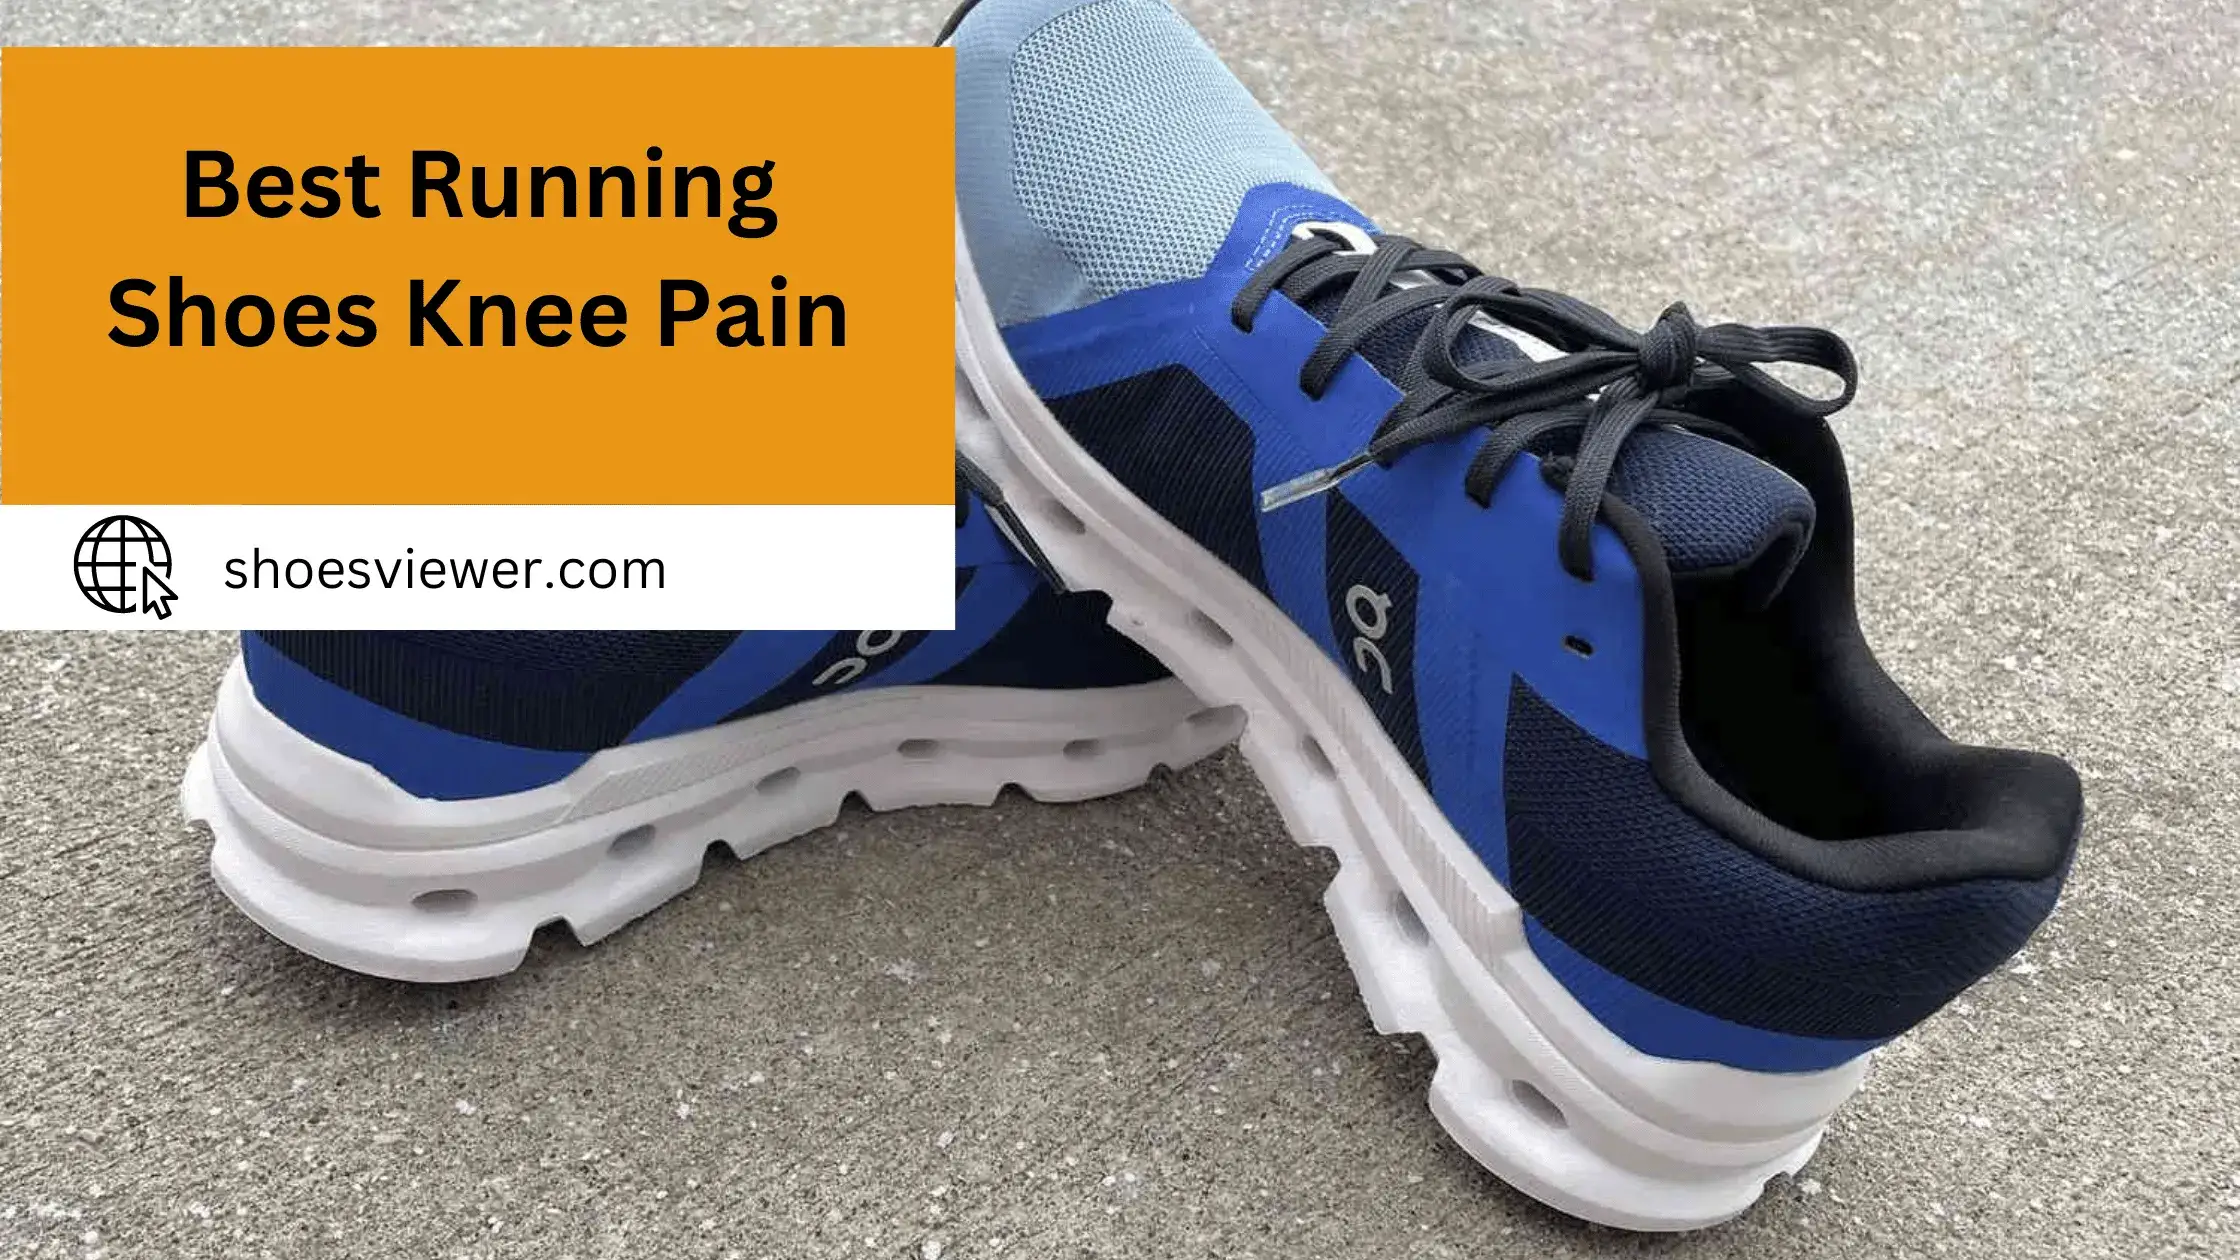 Best Running Shoes Knee Pain - A Comprehensive Guide